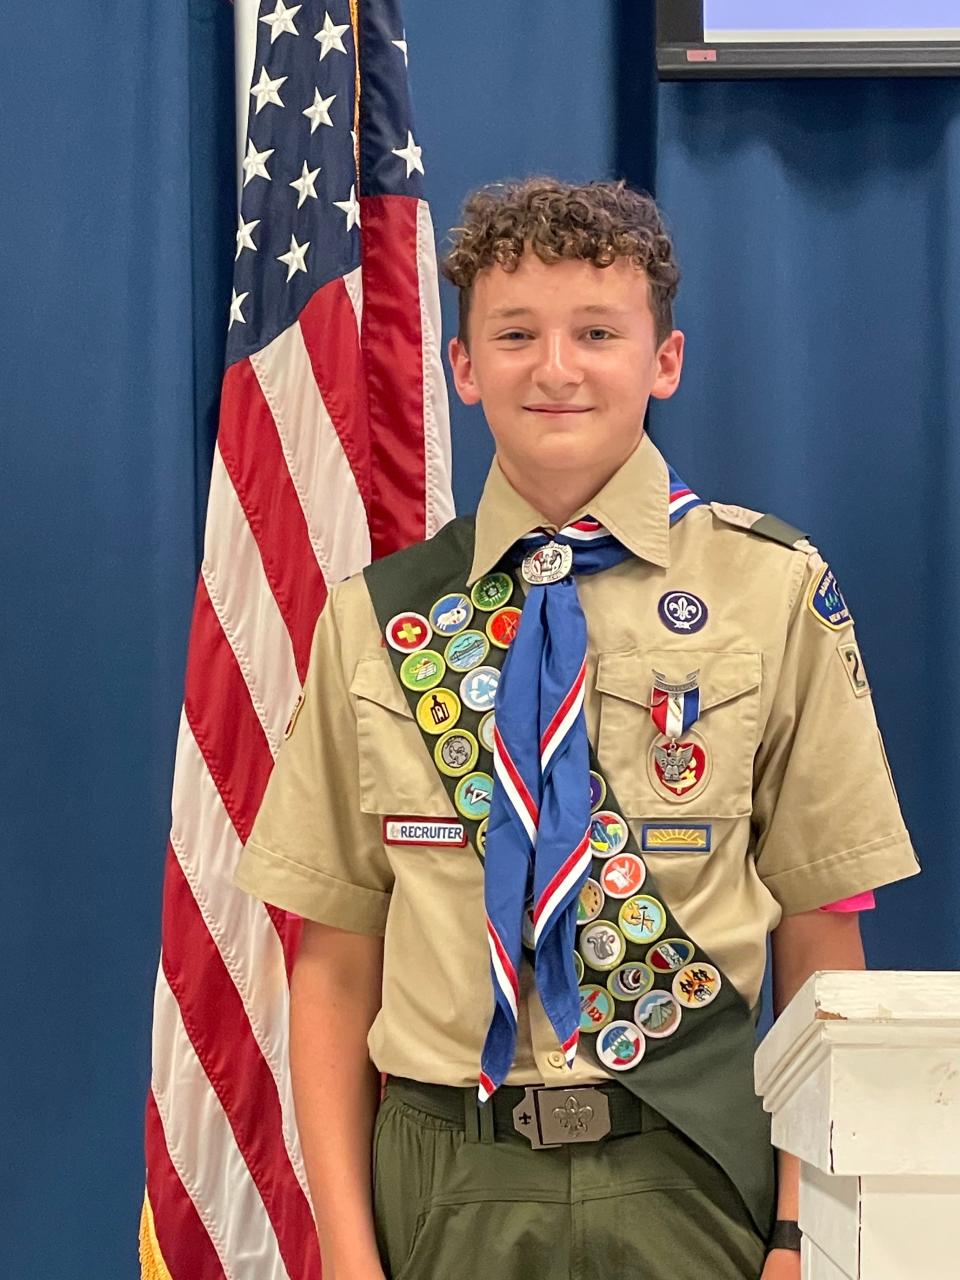 Tristan Huff was one of four local scouts named Eagle Scouts recently. He helped build dugouts at an Endicott softball field as part of his community service project.